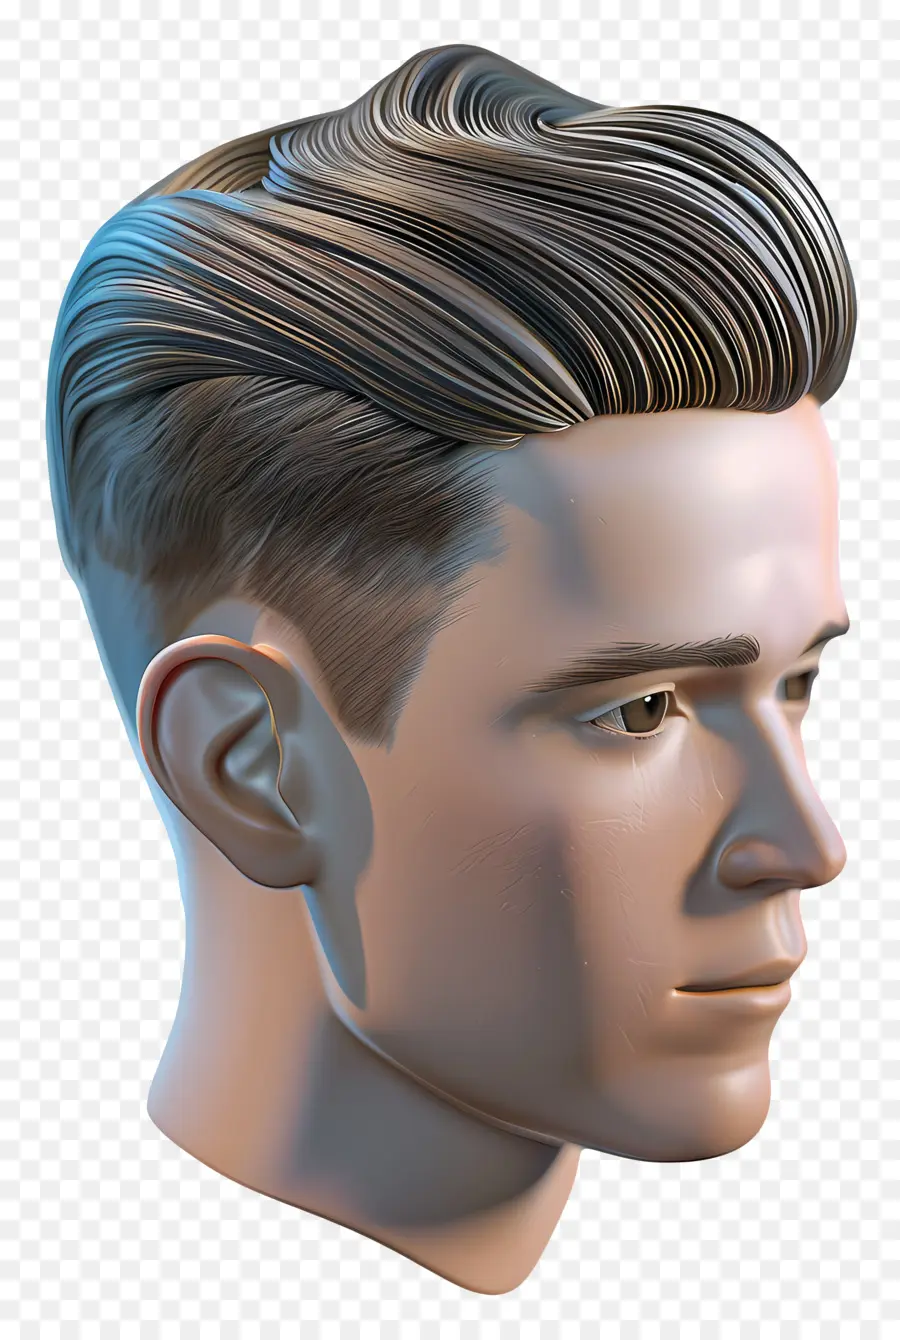 comb over mid fade haircut pompadour hairstyle side part sideburns 3d rendering